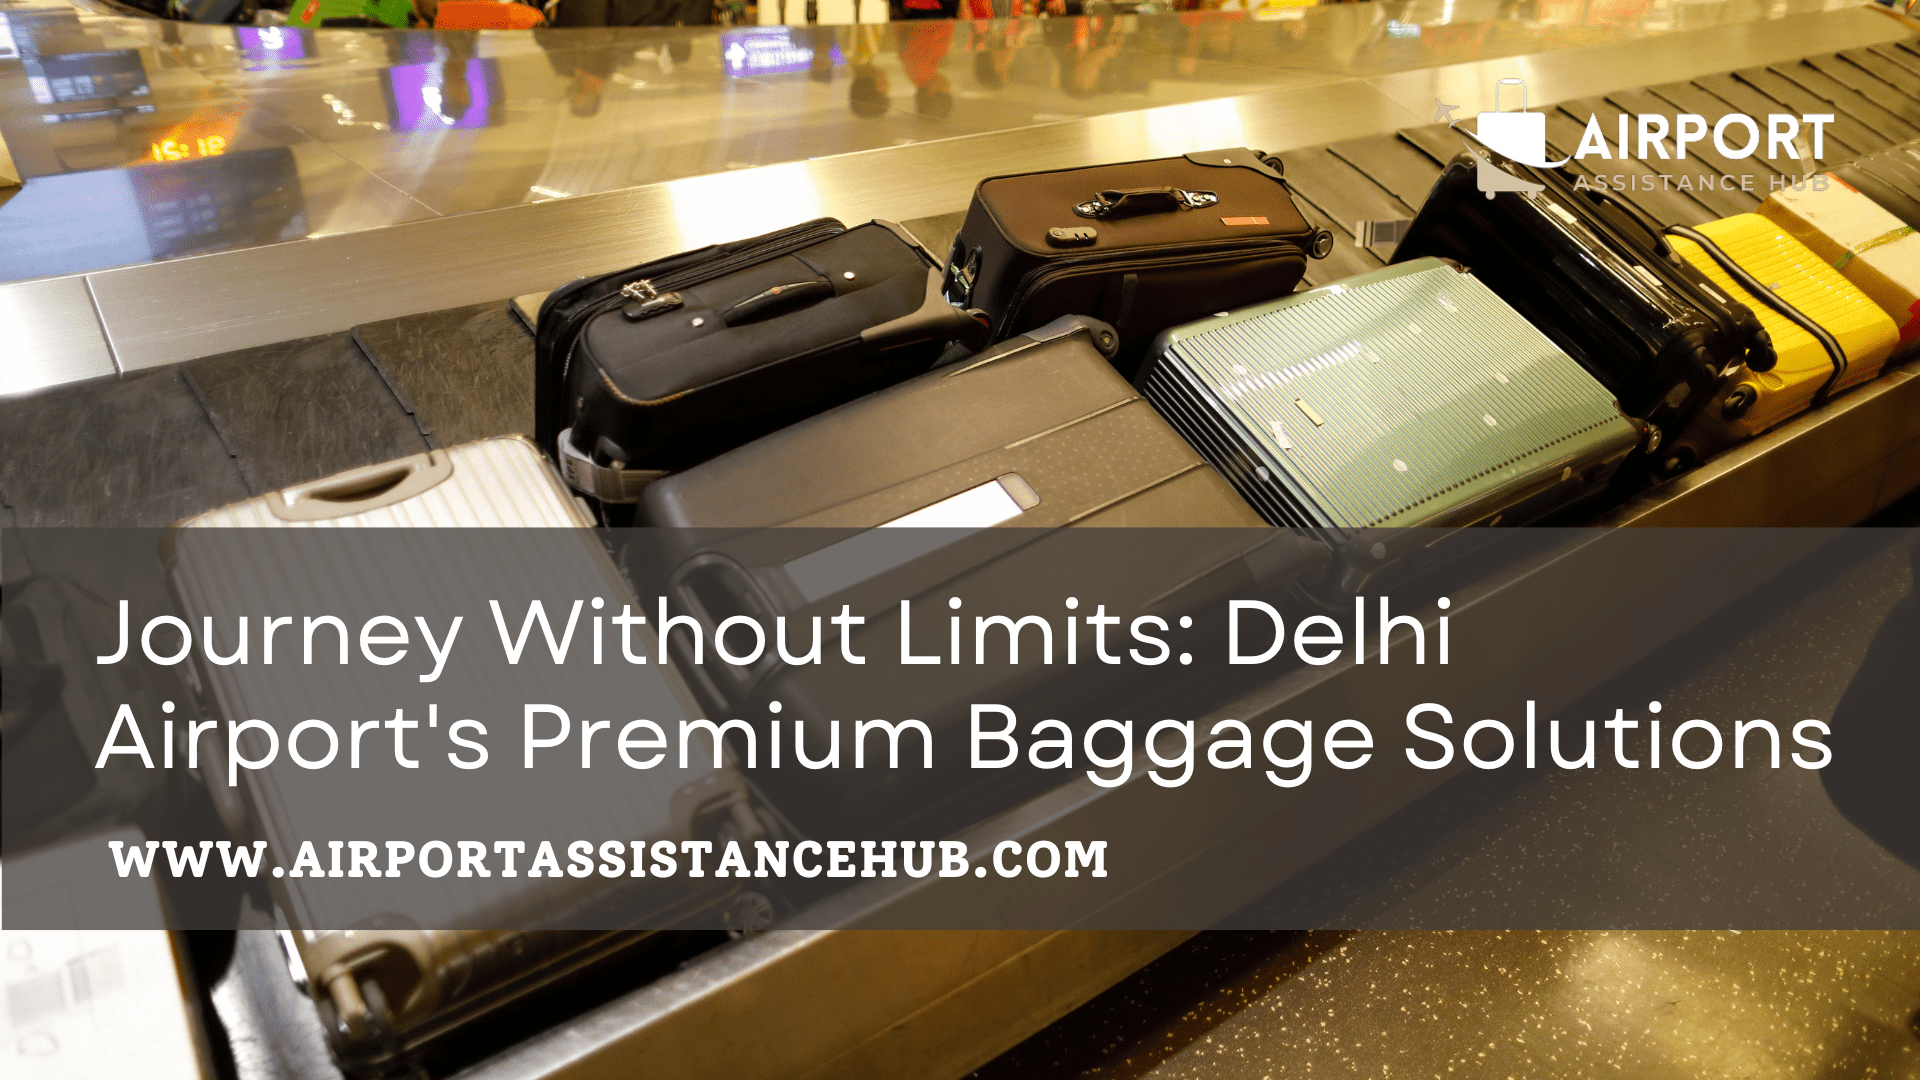 Journey Without Limits: Delhi Airport’s Premium Baggage Solutions